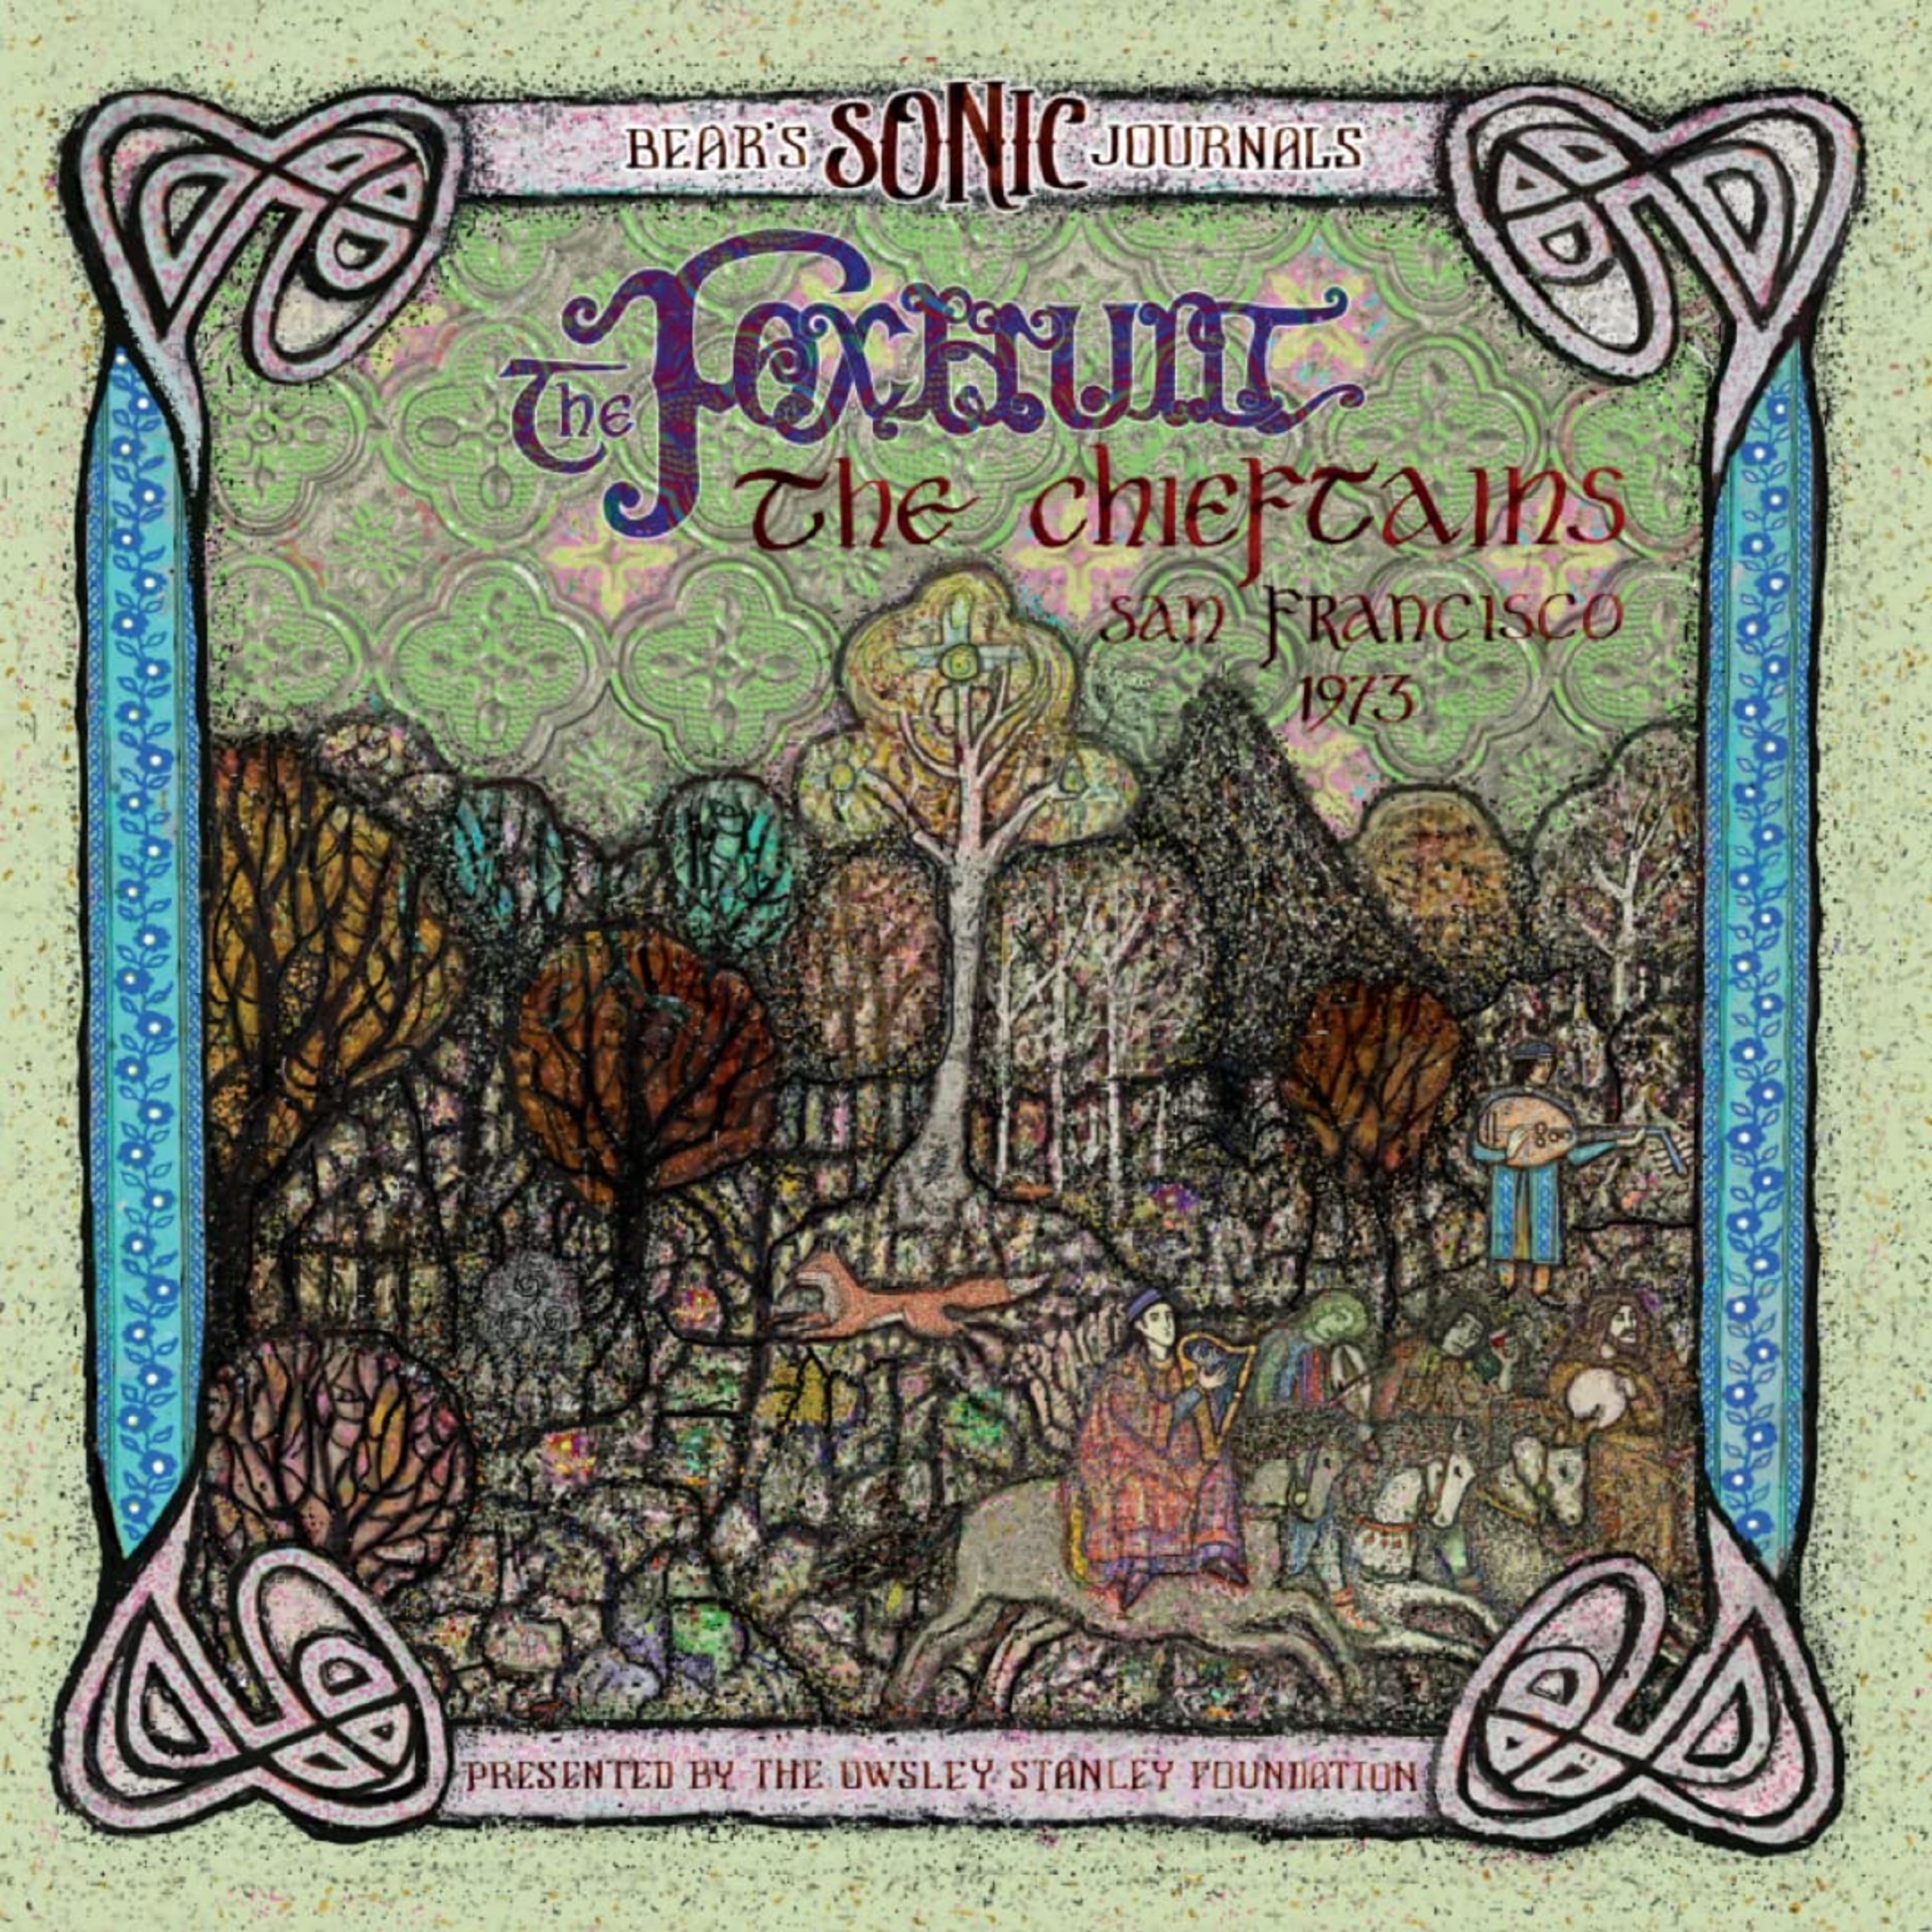 BEAR’S SONIC JOURNALS: THE FOXHUNT, THE CHIEFTAINS LIVE IN SAN FRANCISCO 1973 & 1976